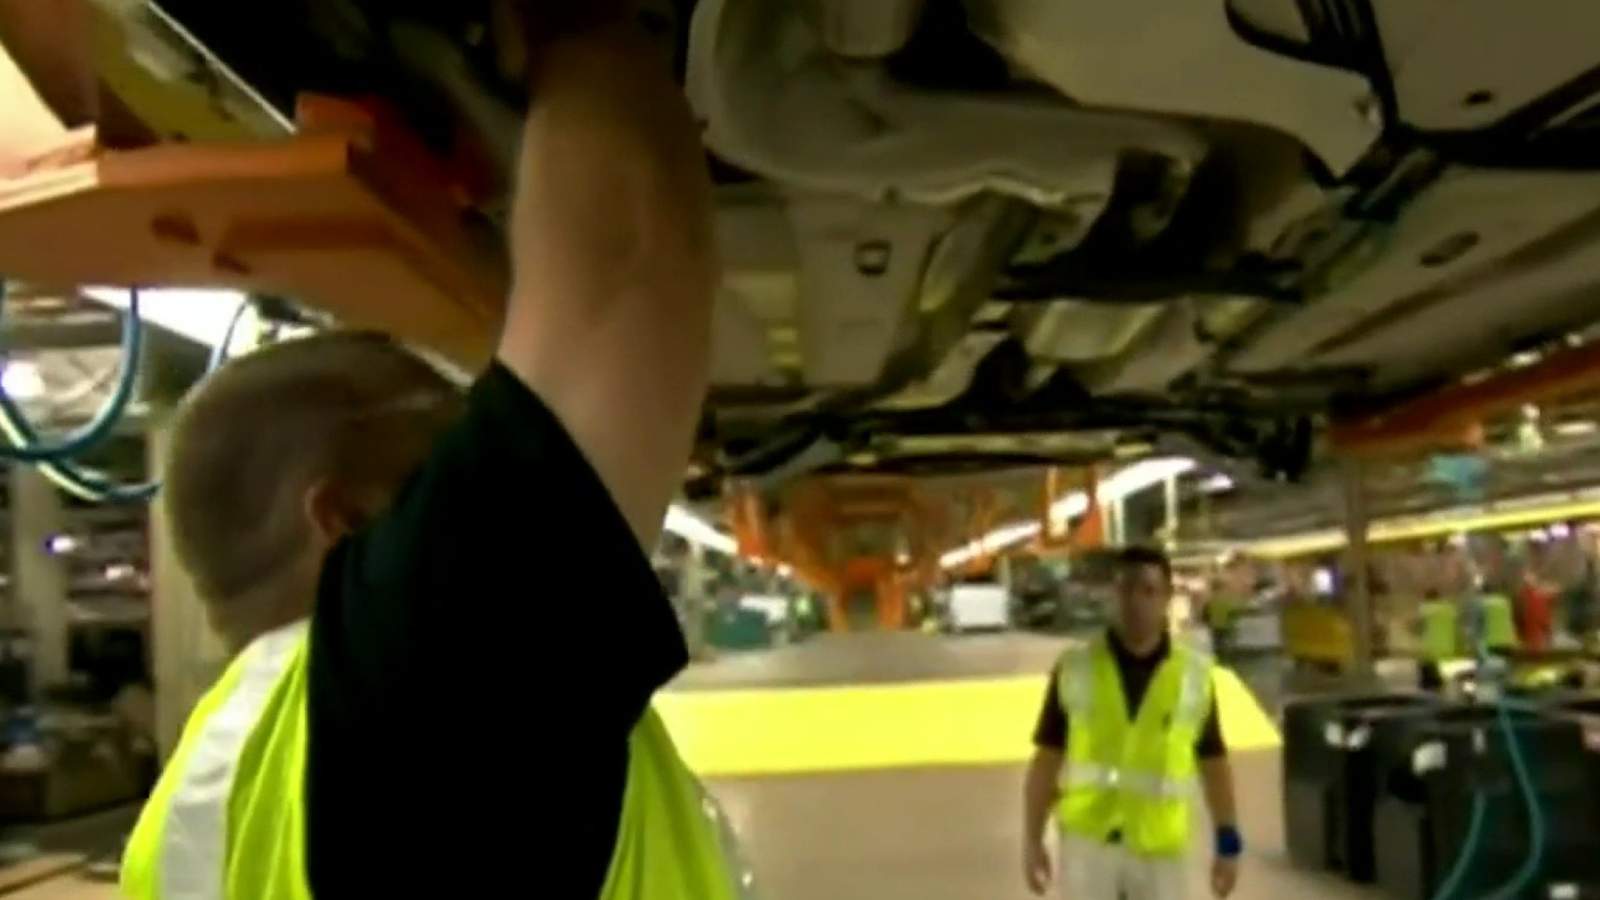 This is going to be one of the safest place to be, Ford CEO says before reopening Monday